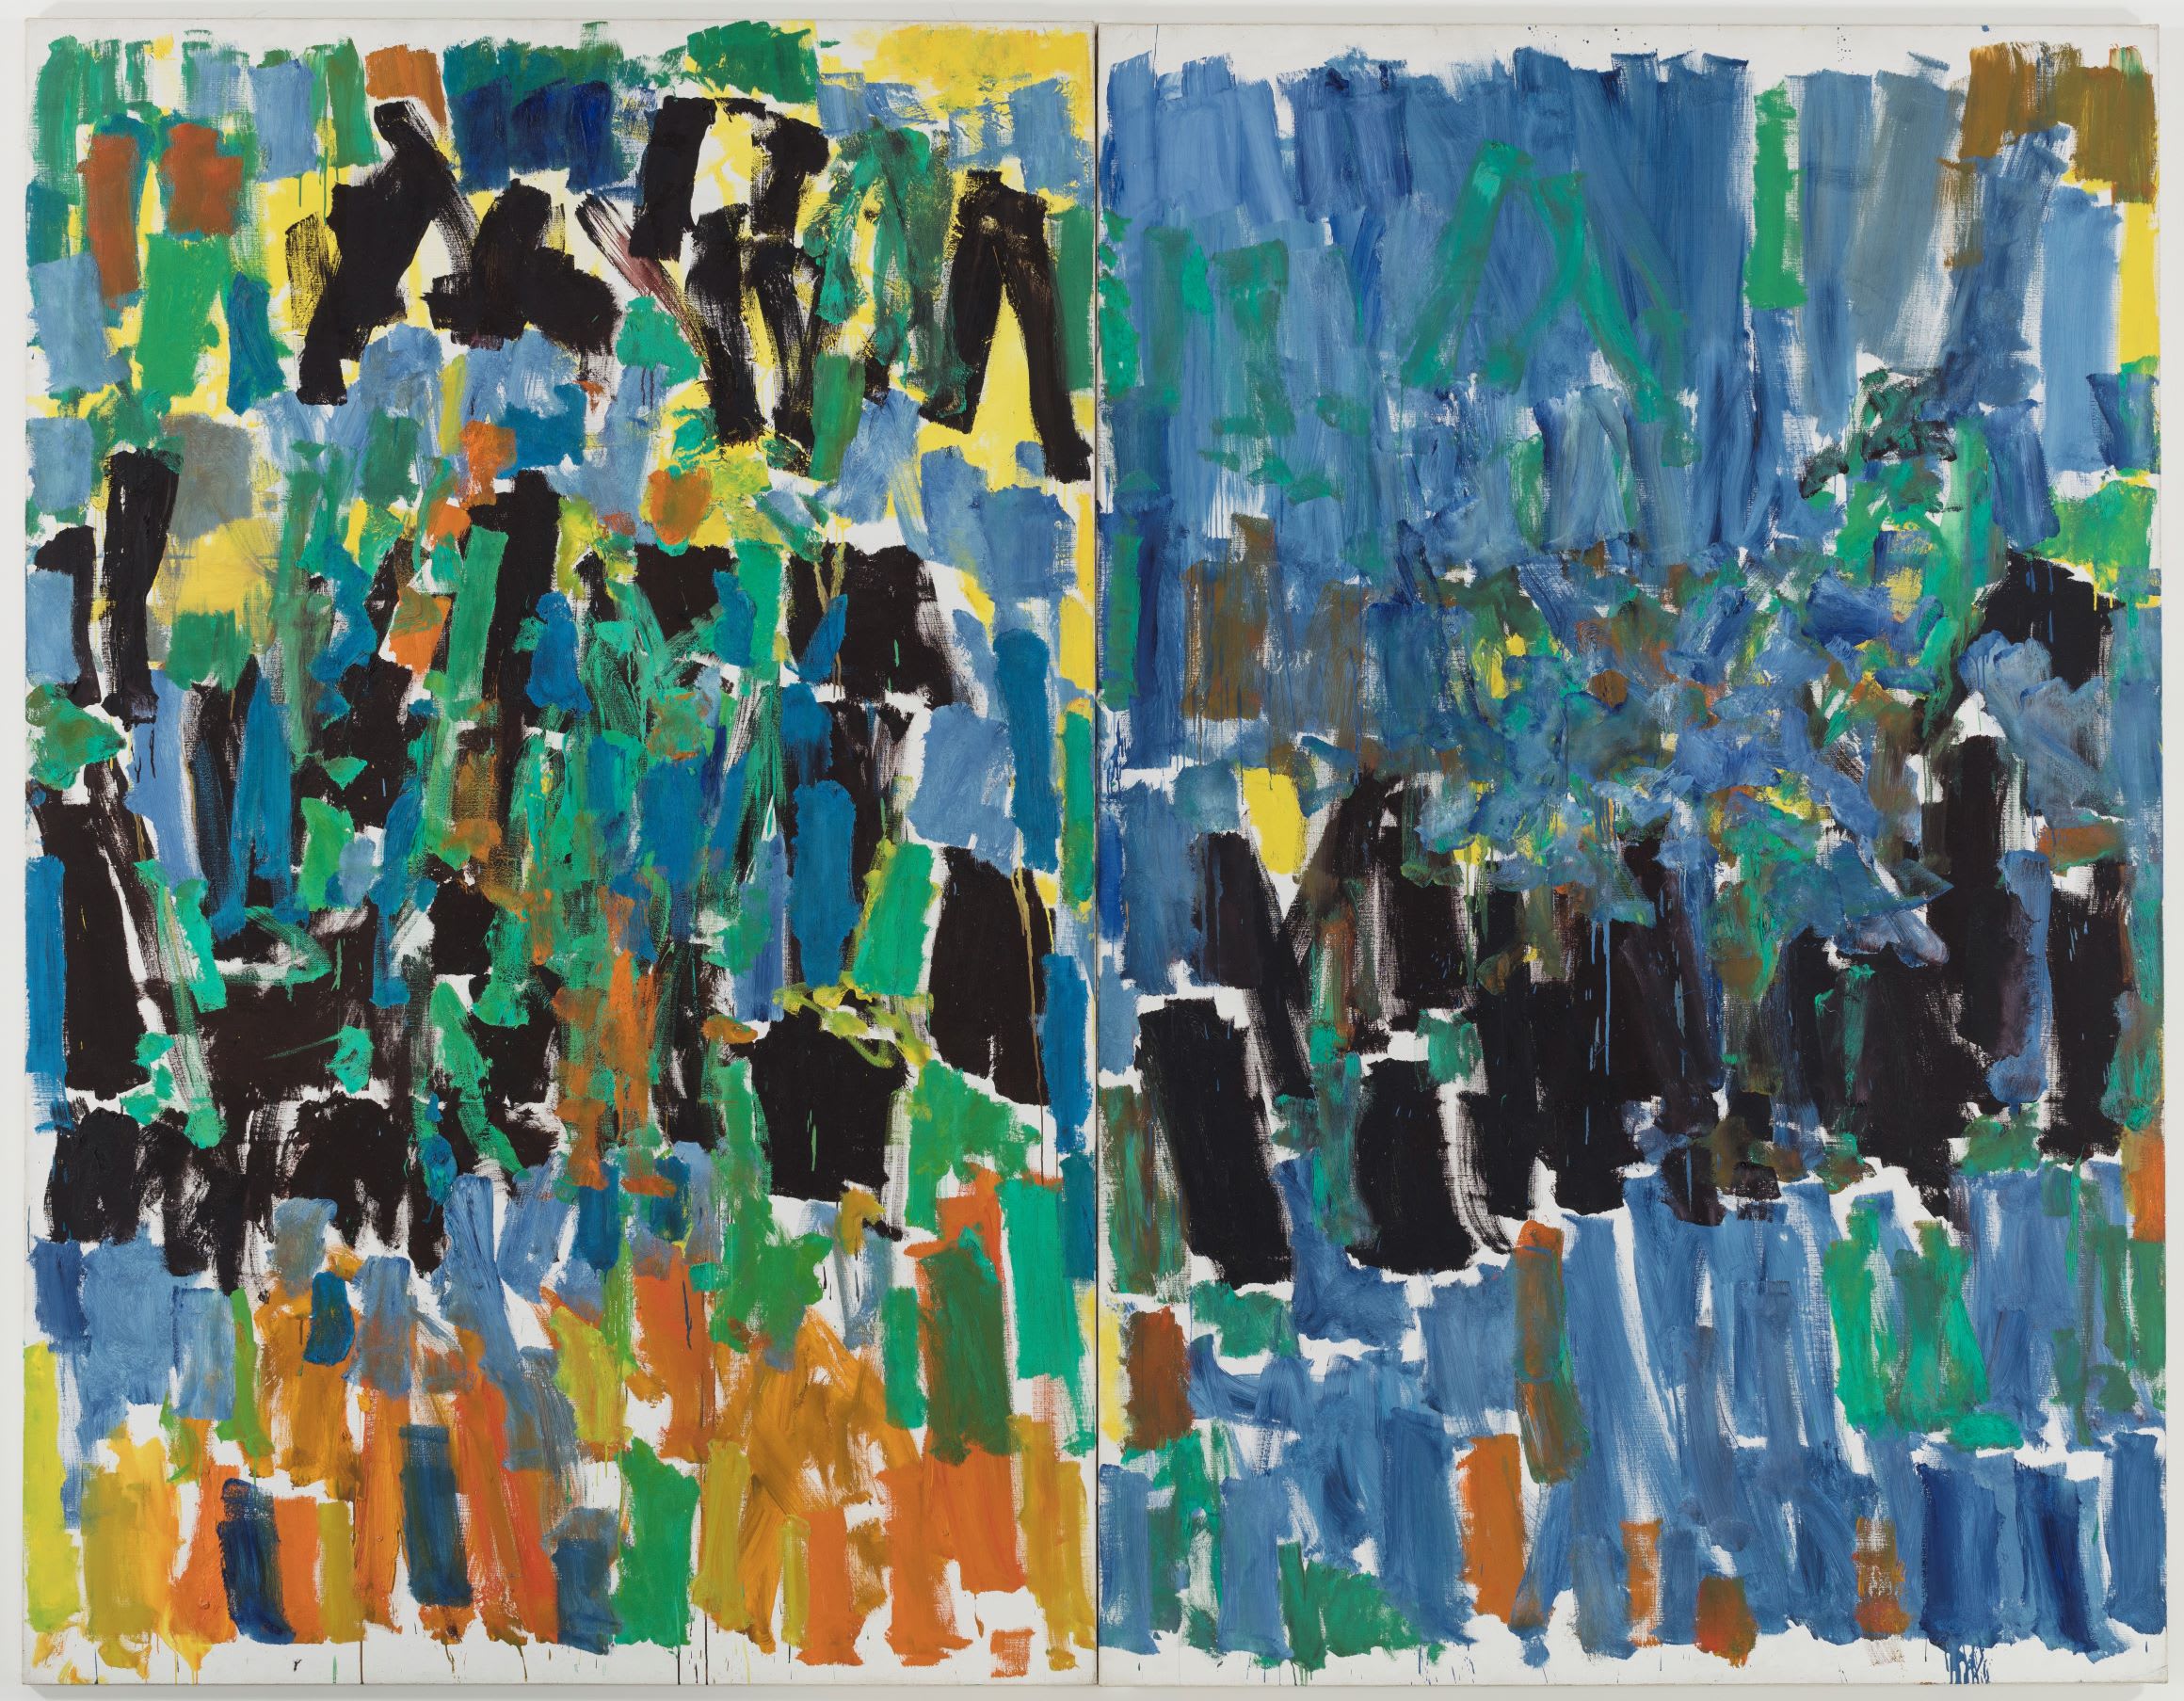 Joan Mitchell, No Room at the End, 1977. Fondation Louis Vuitton, Paris © The Estate of Joan Mitchell